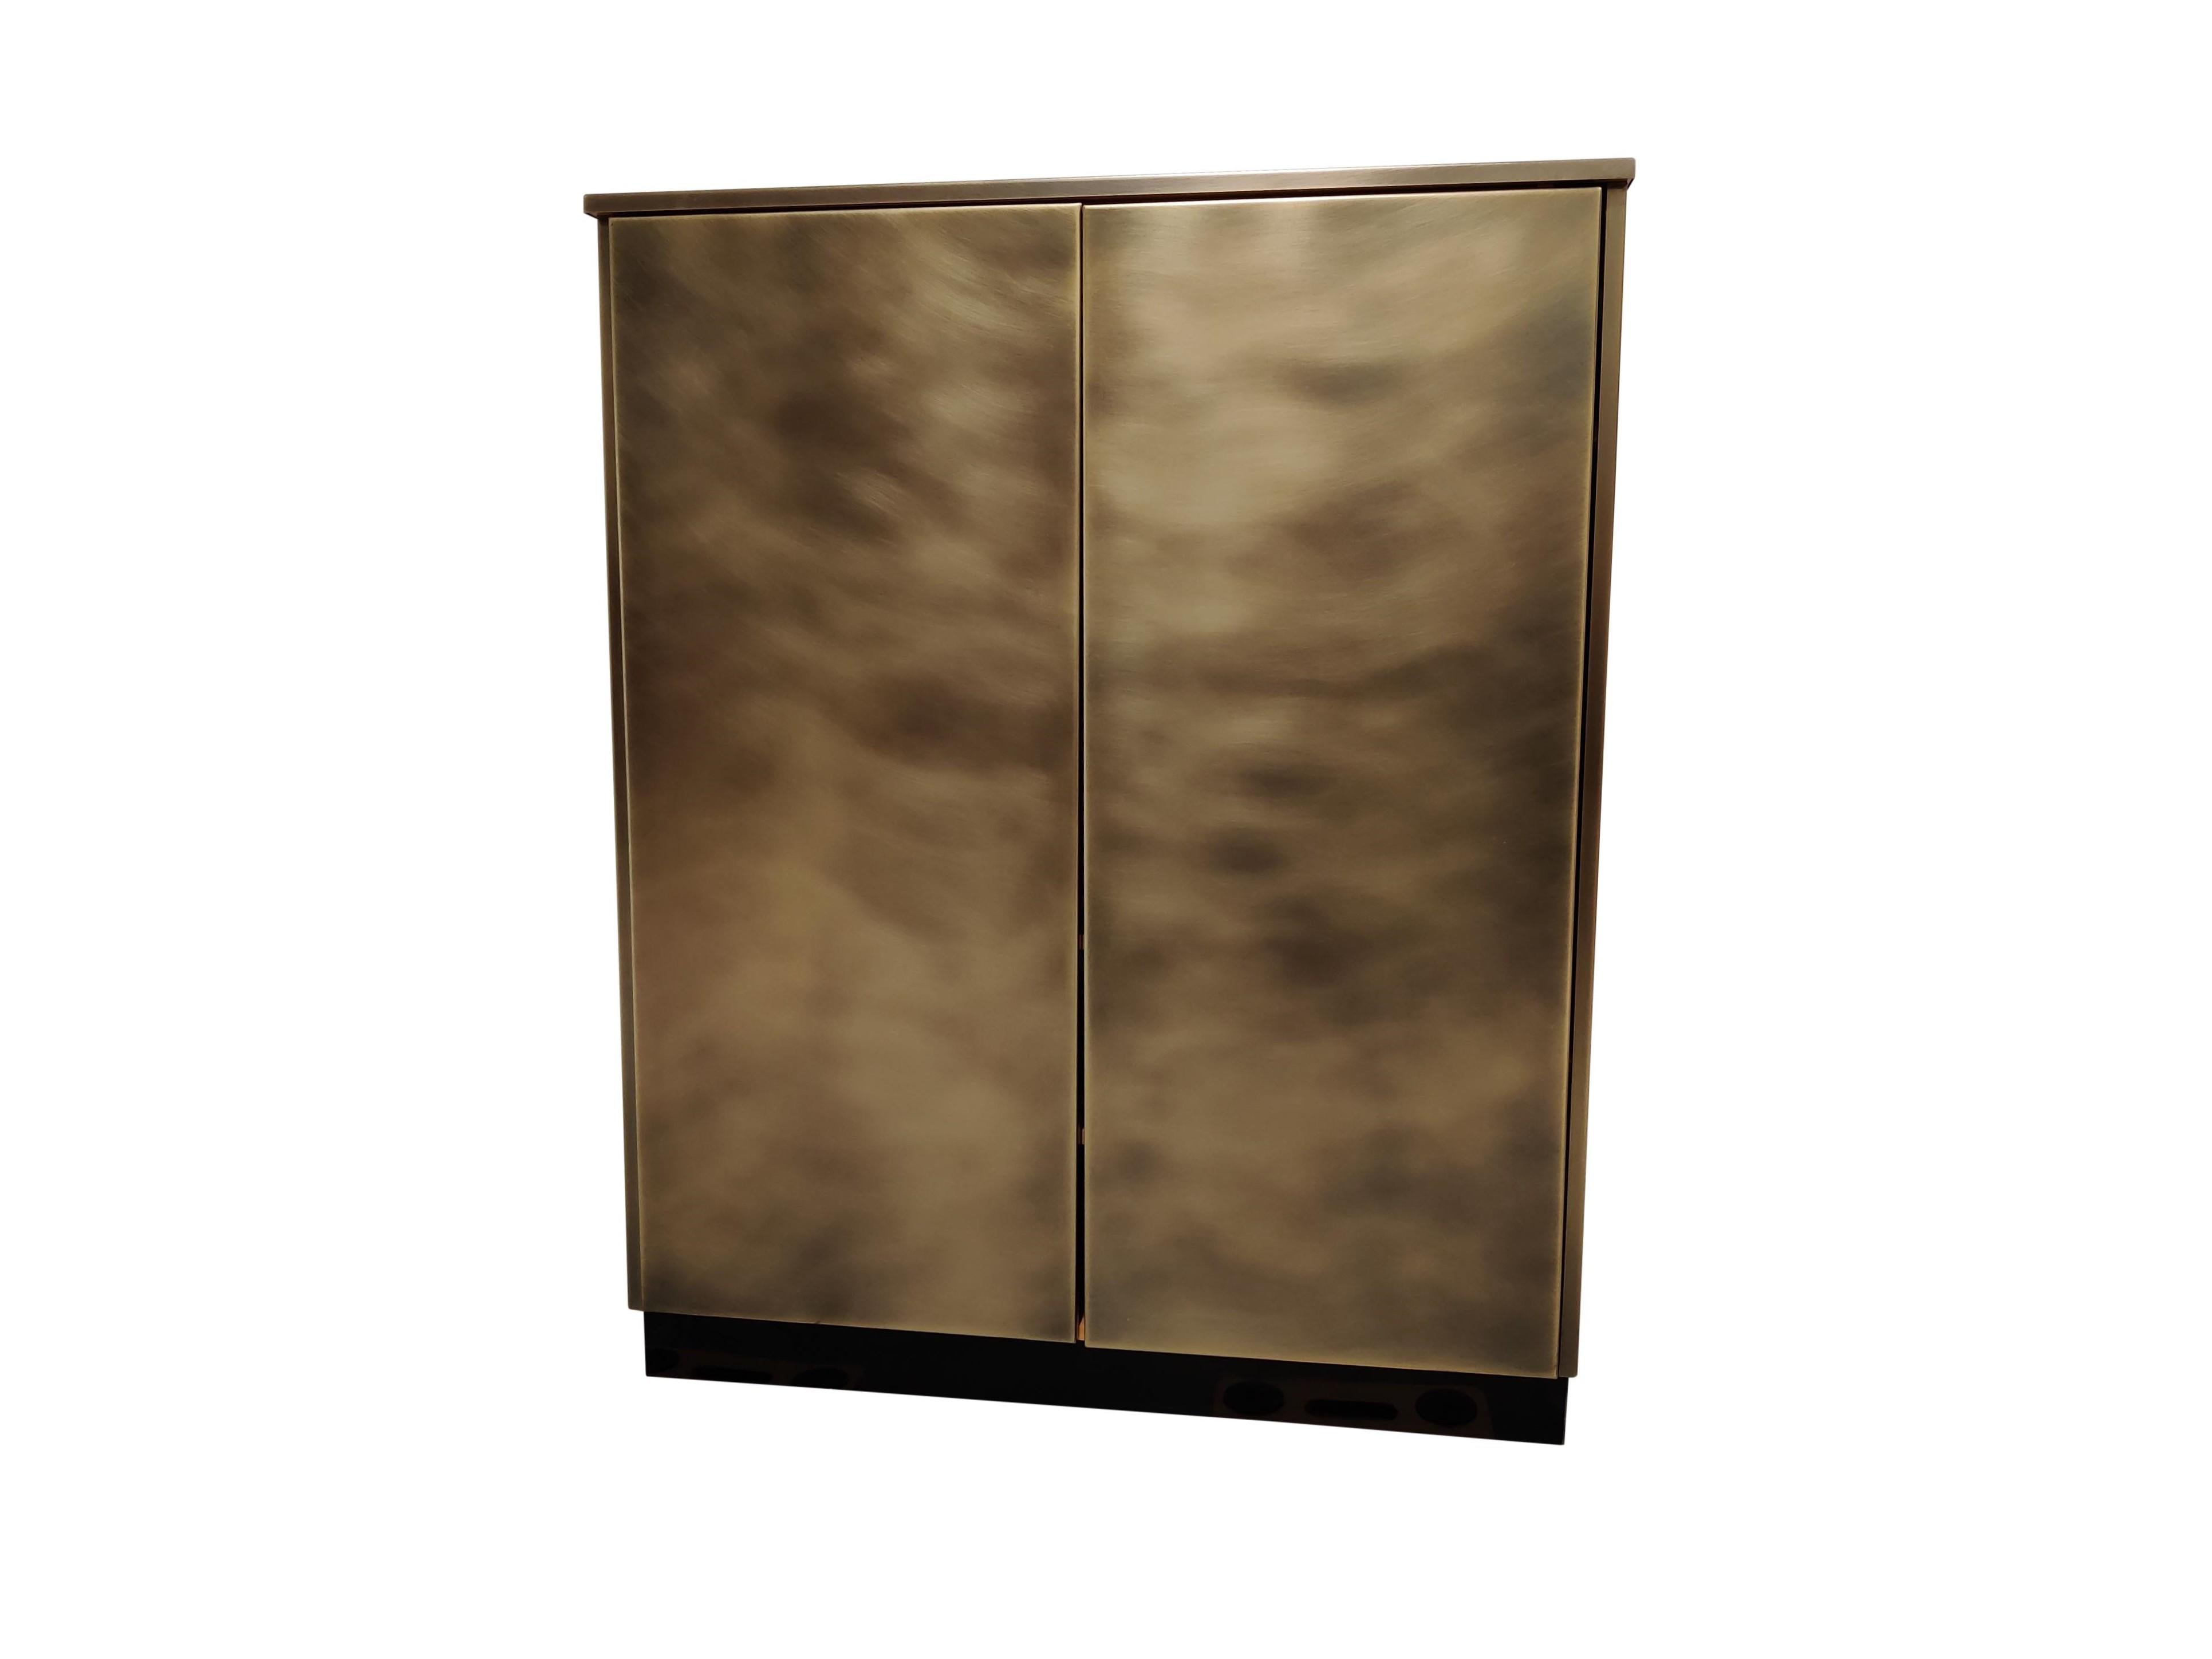 Beautiful brass bar cabinet by Belgochrom.

Glass shelve and mirrors inside. 

Belgochrom used to make high quality furniture that was sold in high end furniture shops all around Belgium. They went bust in 2011.

This cabinet dates from the